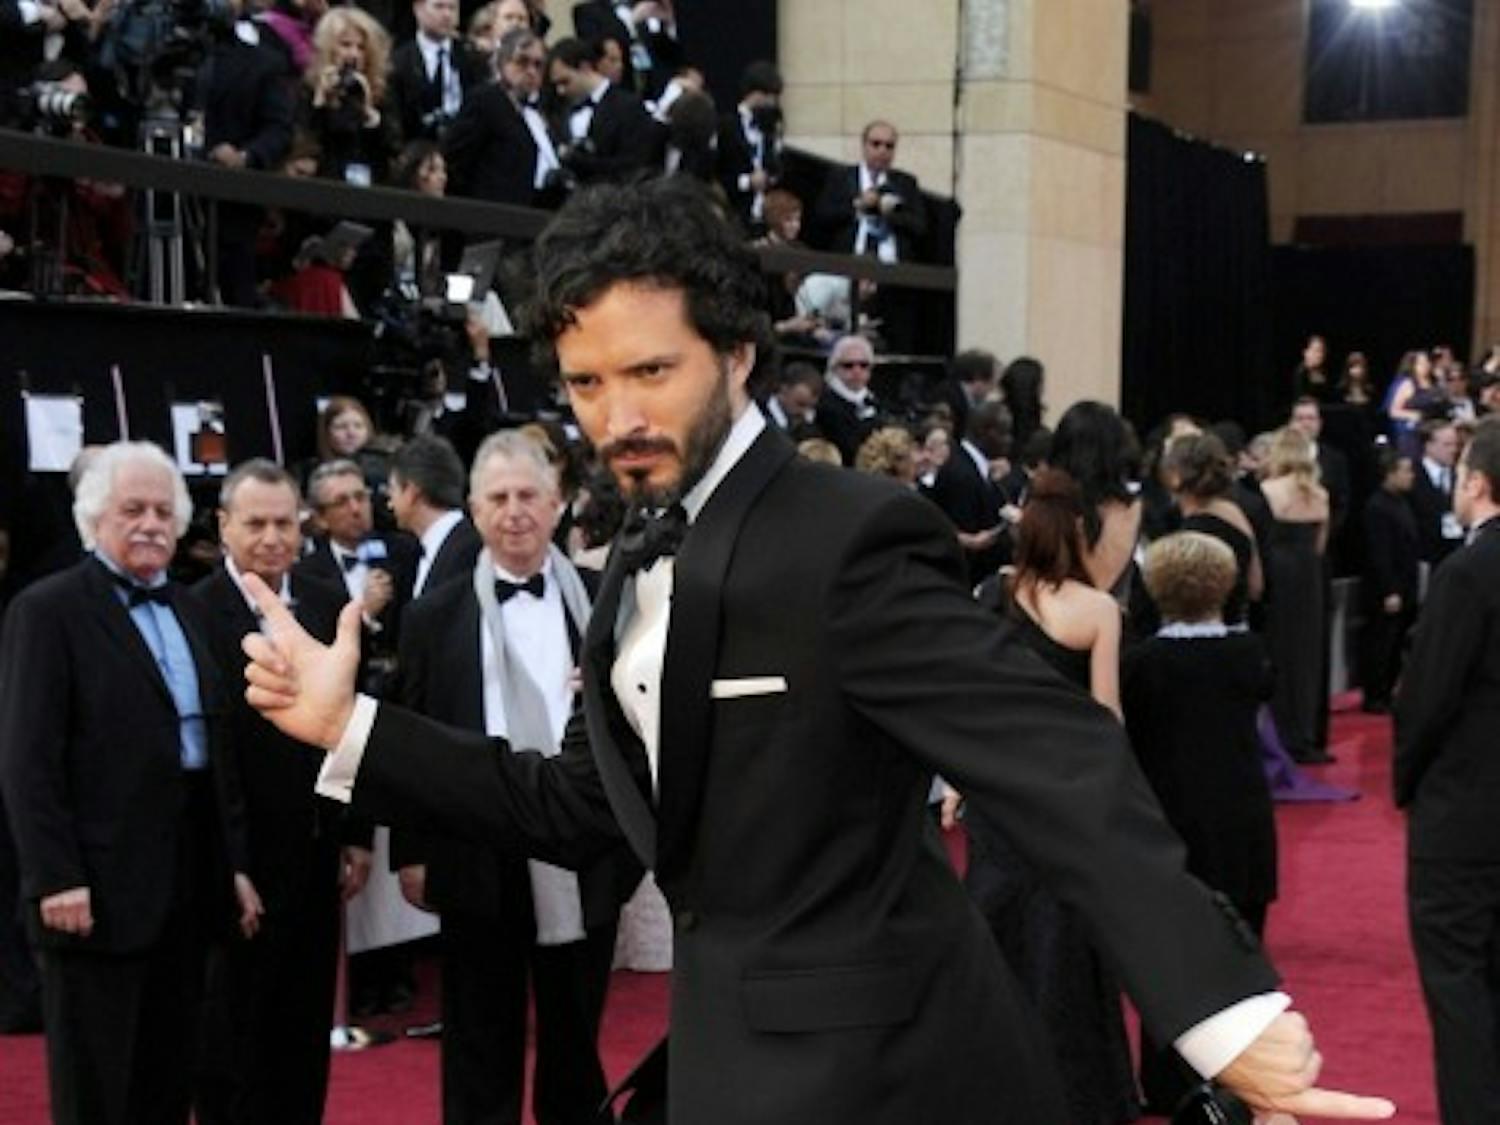 “Conchord” Bret McKenzie arrives at the Oscars ready to have some fun and take home an award.